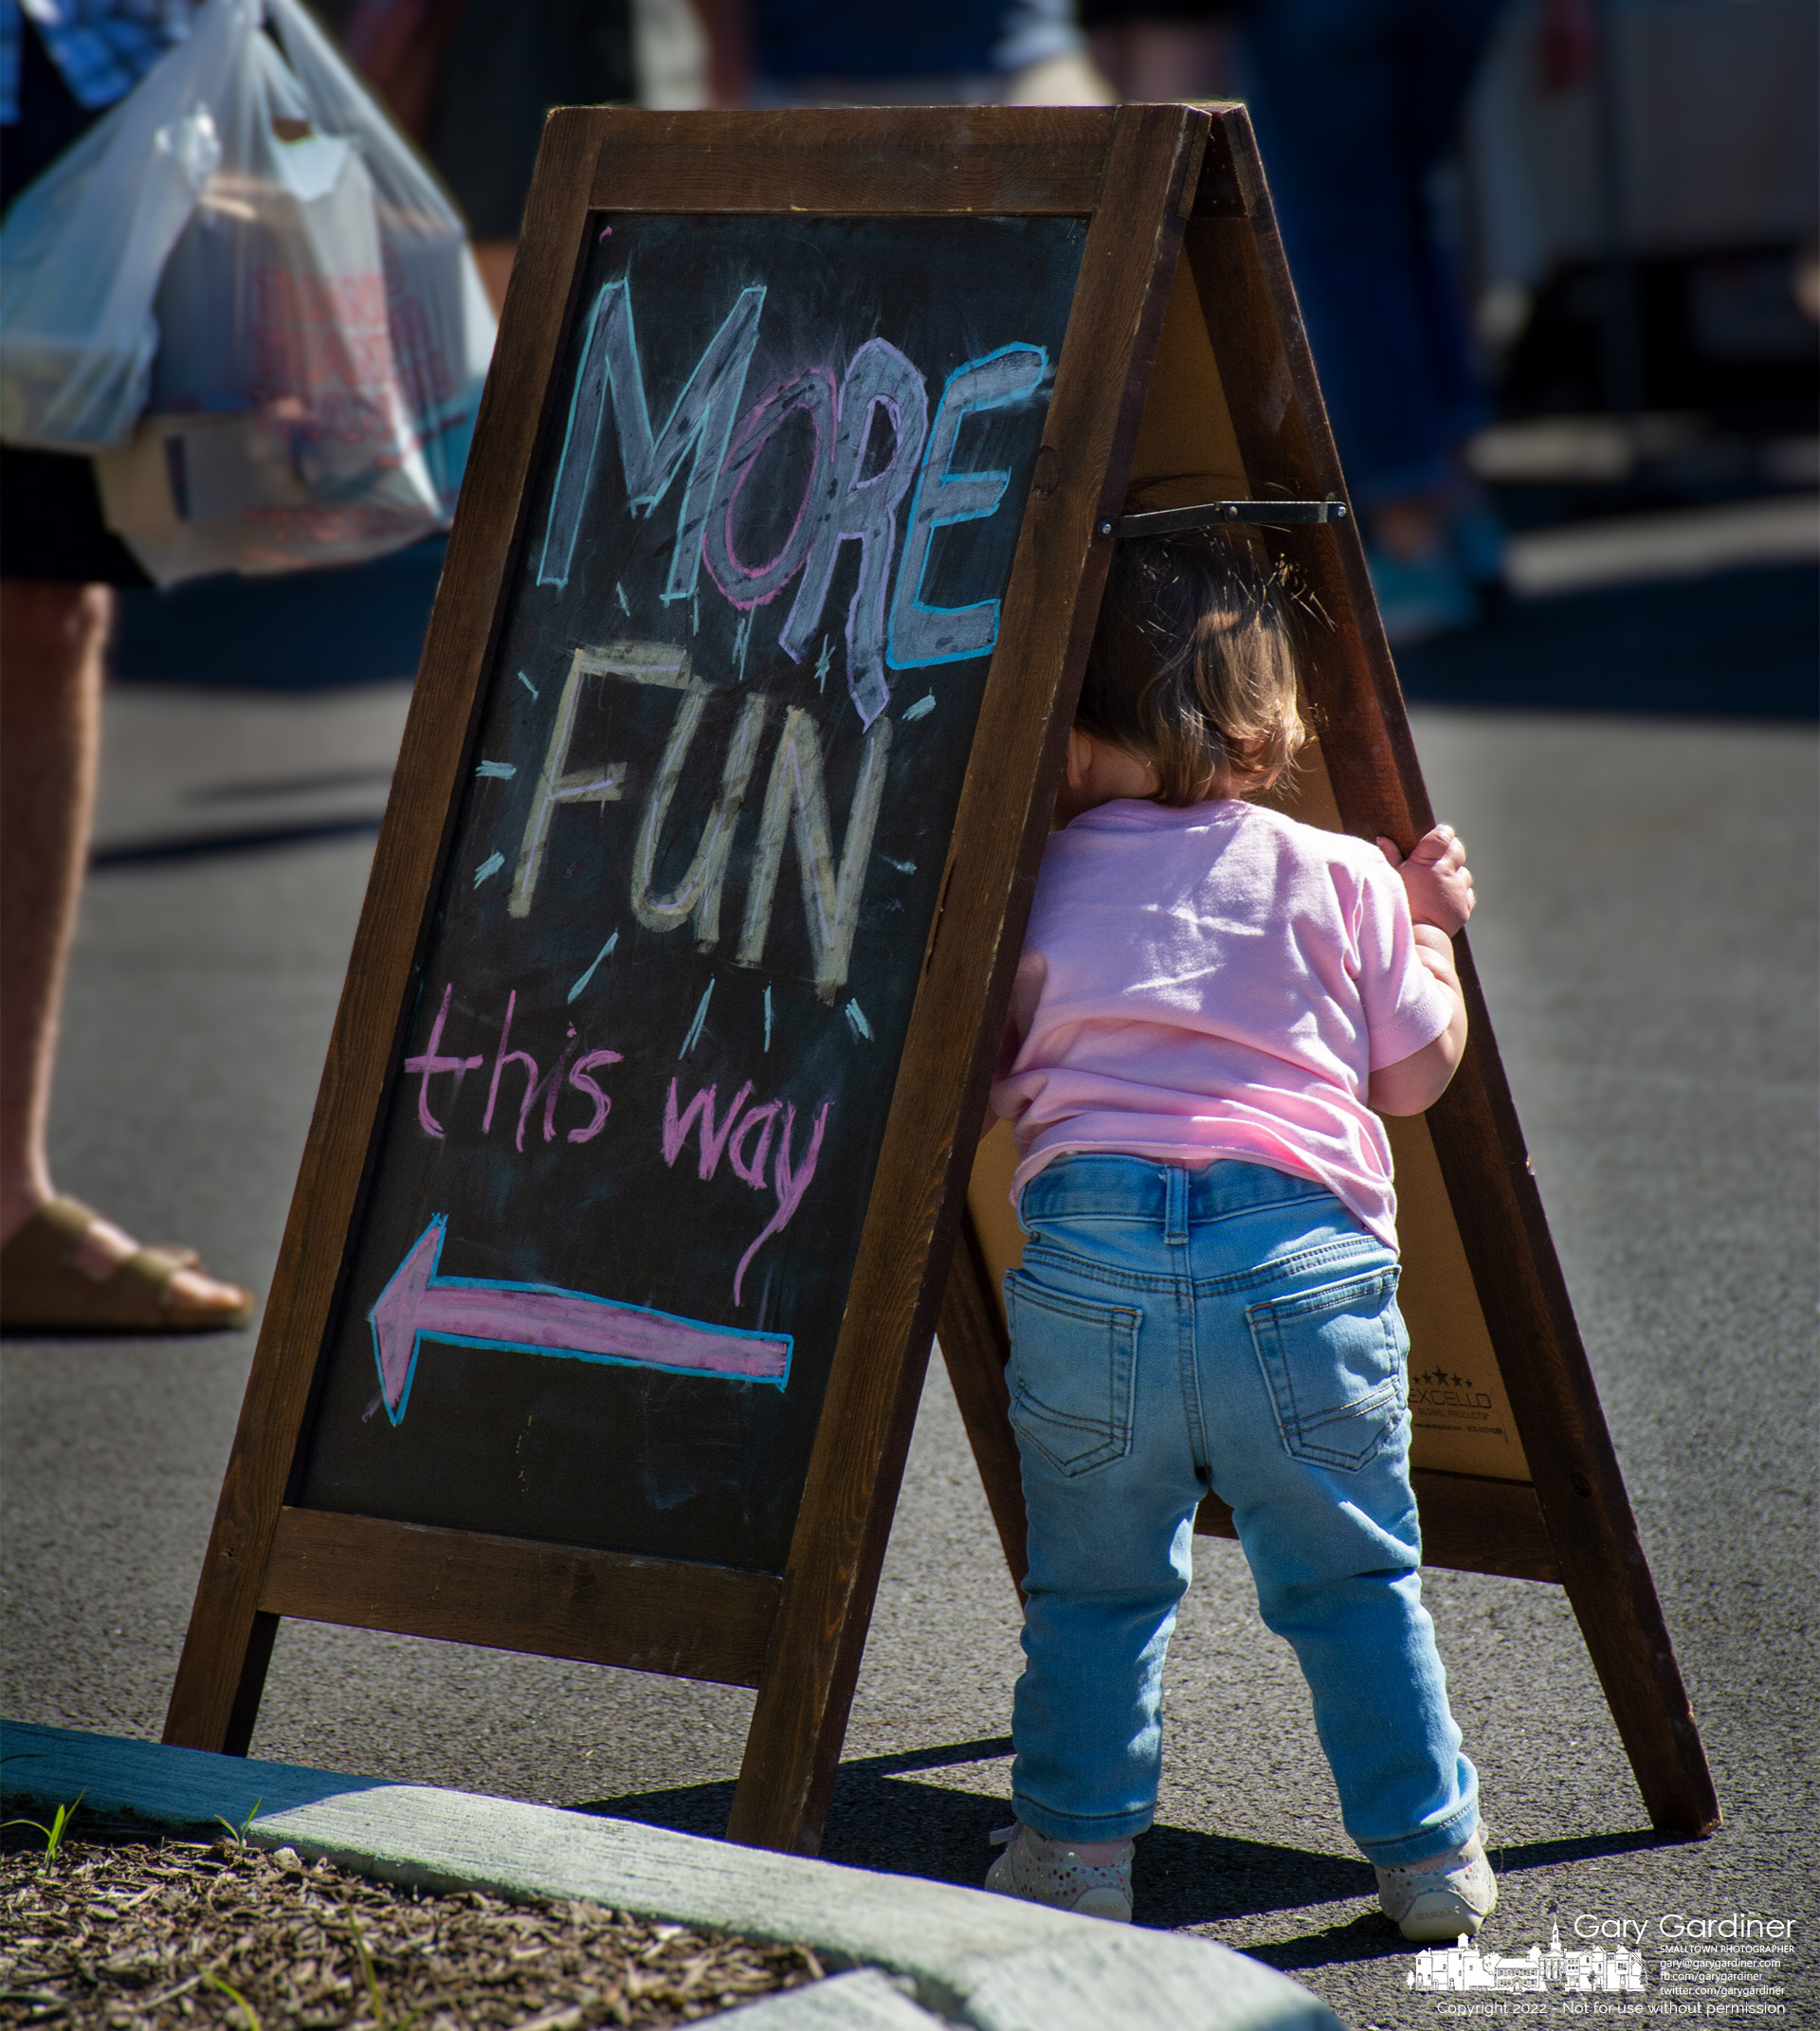 A toddler passes through a signboard indicating a more fun experience than staying with her parents at the Saturday Farmers' Market in Uptown Westerville Saturday morning. My Final Photo for June 18, 2022.